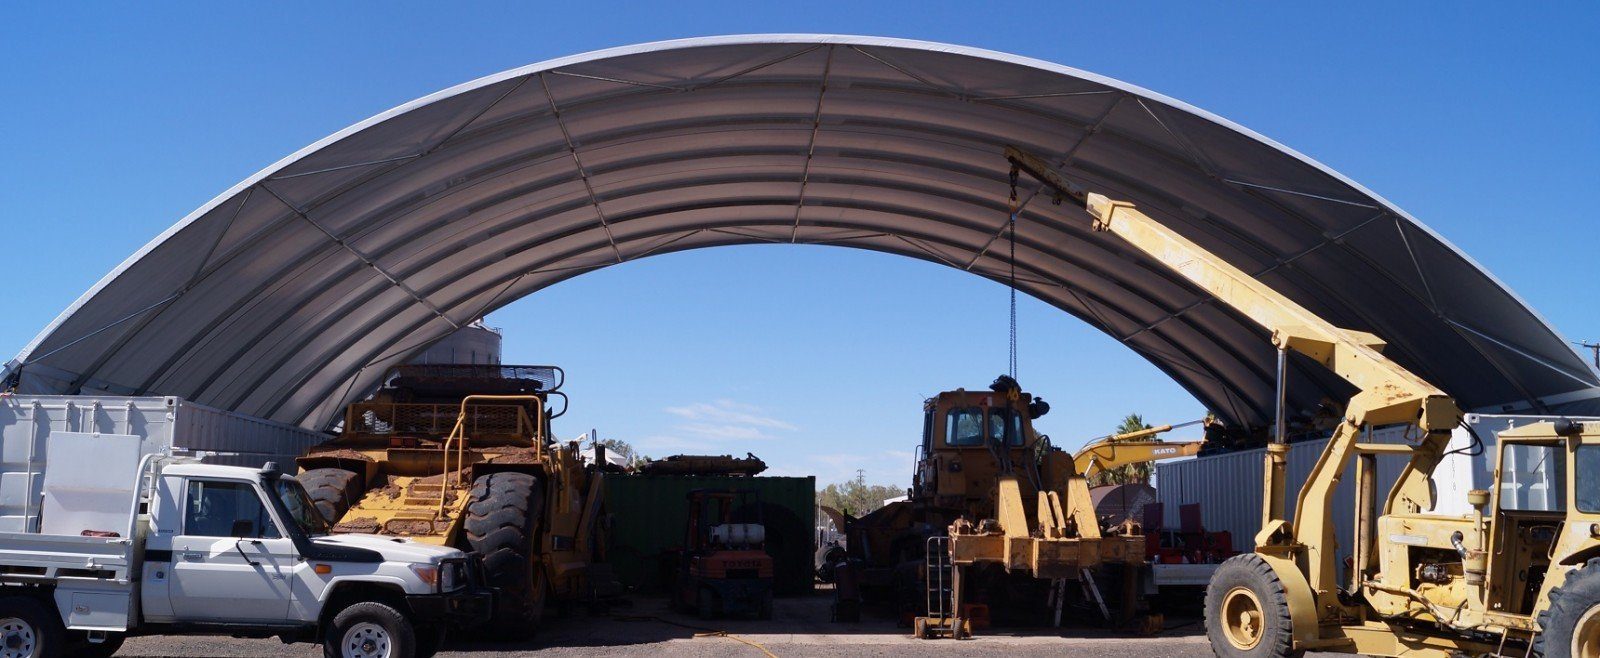 21m span dome shelter